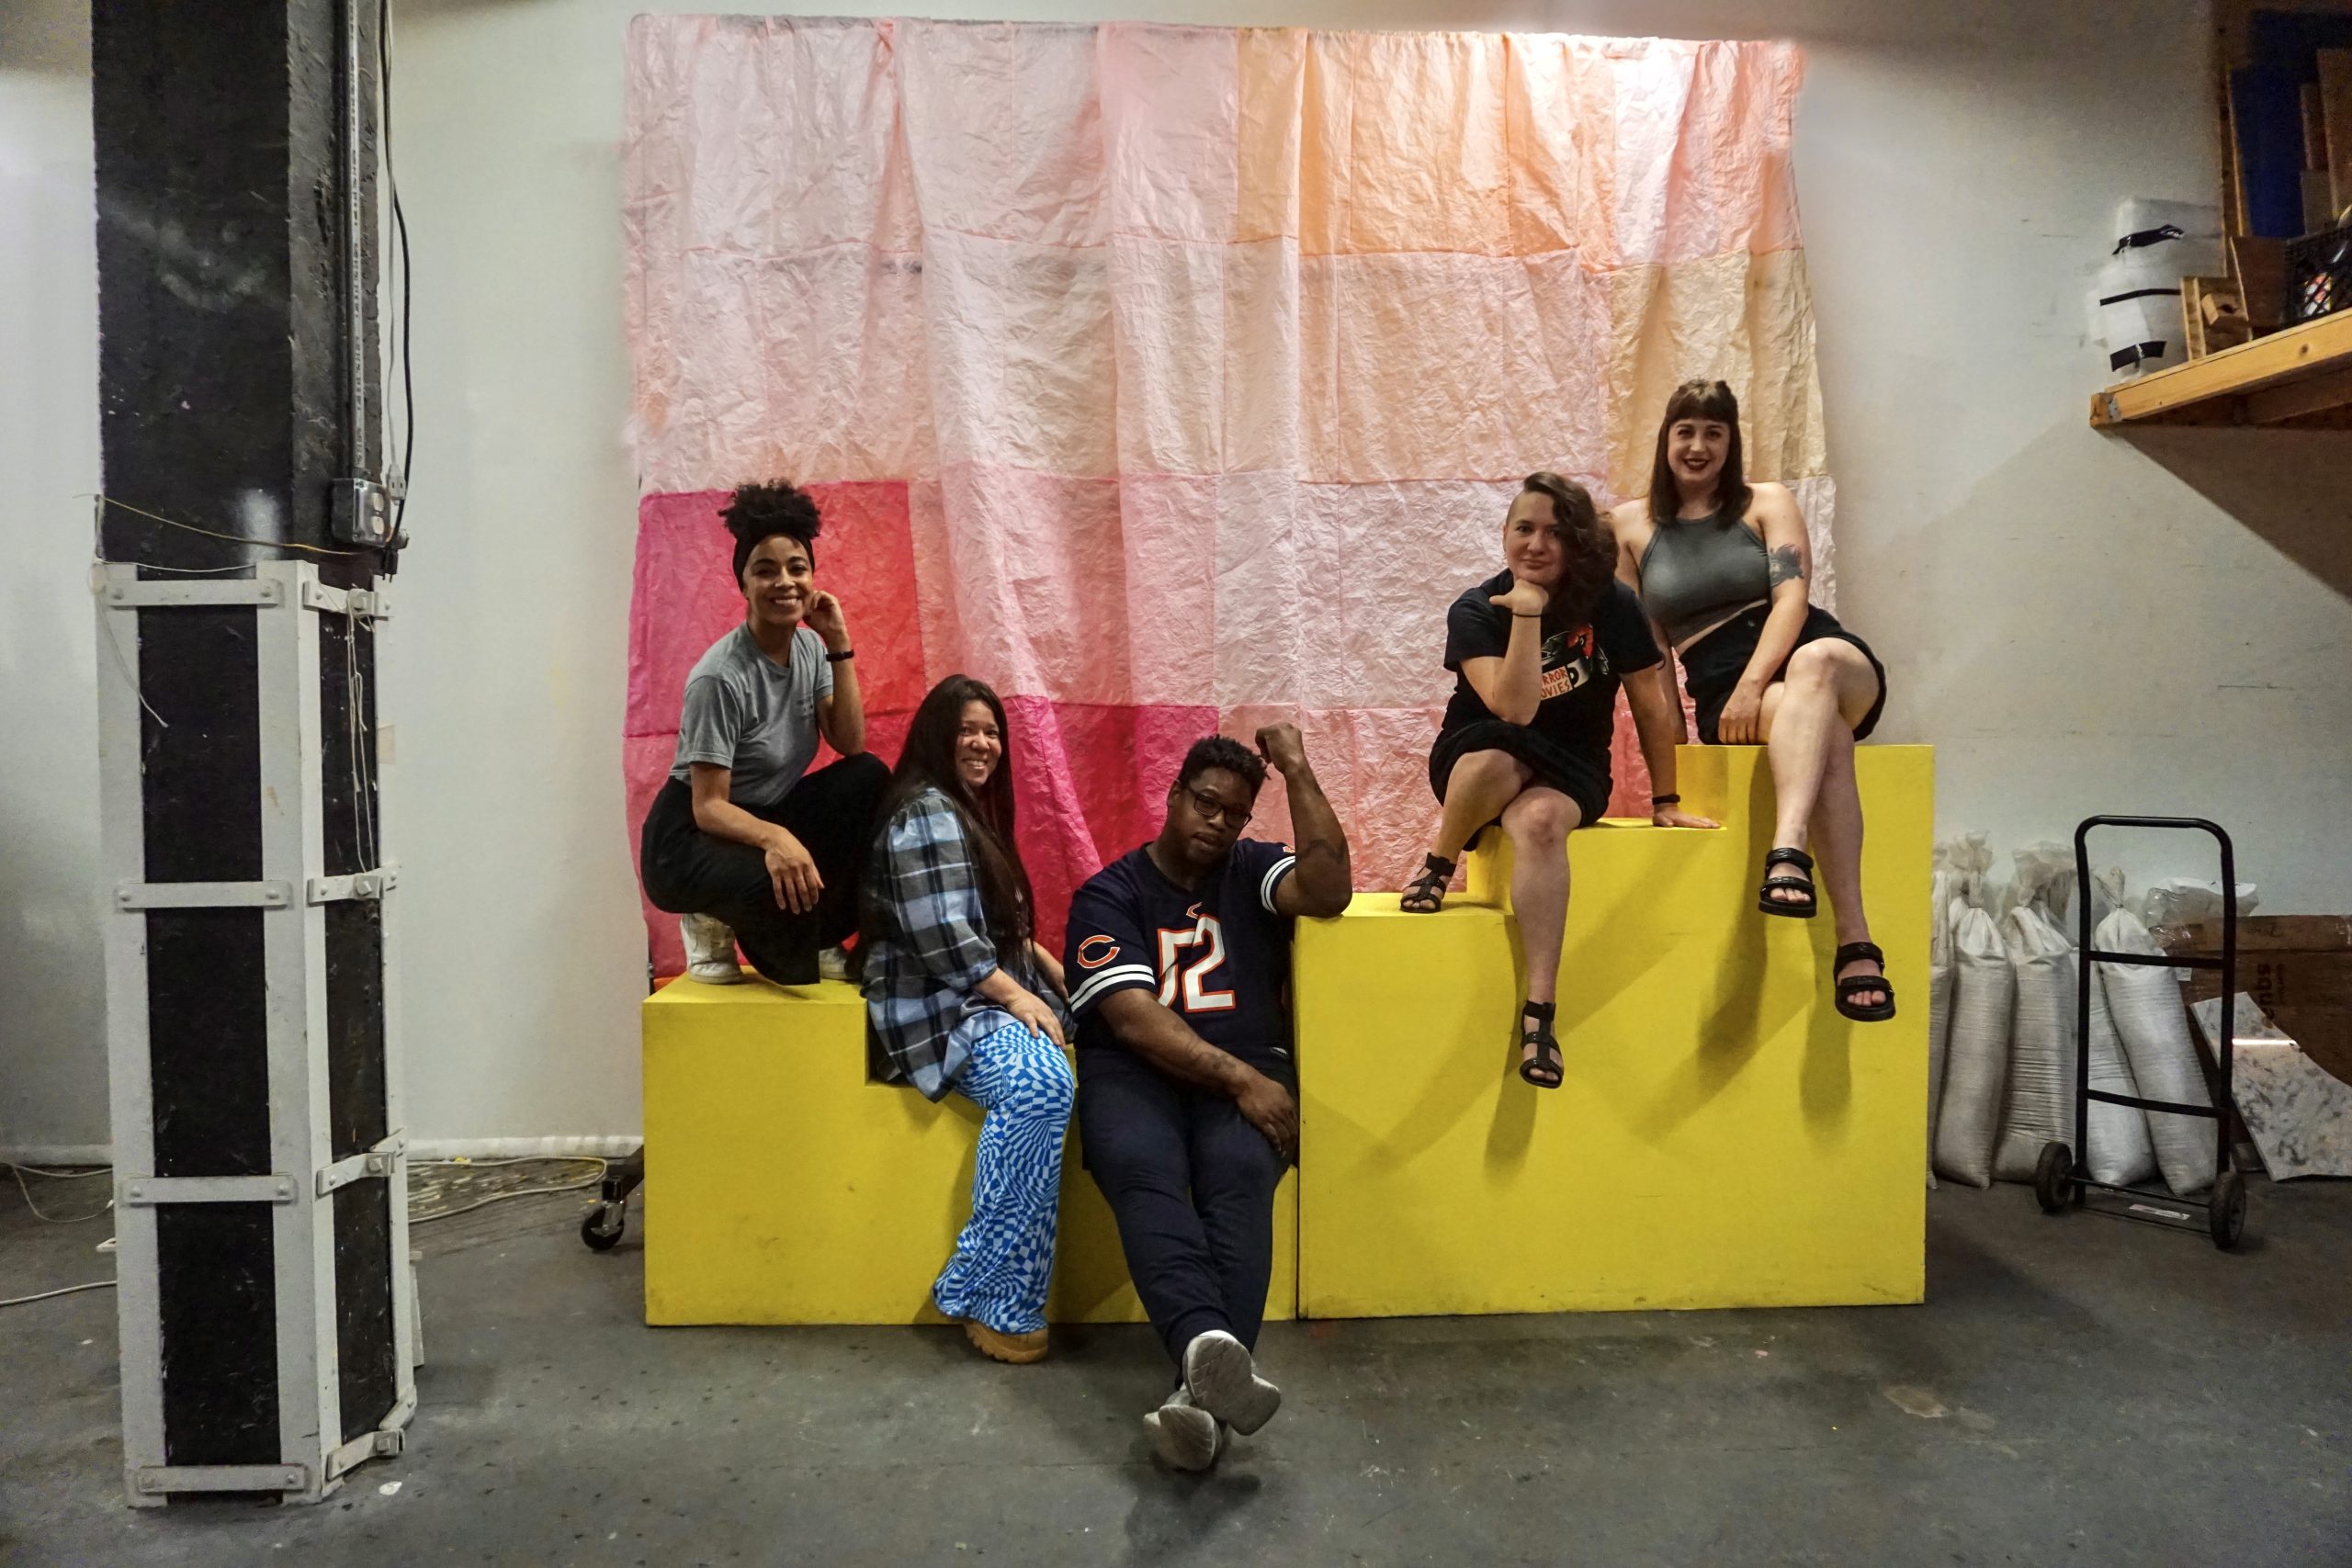 Featured image: A photo of the five Canje cohort members sitting on a yellow platform in front of a pink background at FORTUNA (the studio of Natalia Villanueva Linares). From left to right: Kiki Lechuga-Dupont, Natalia Villanueva Linares, EdVette Jones, Morgan Green, and Christina Nafziger.